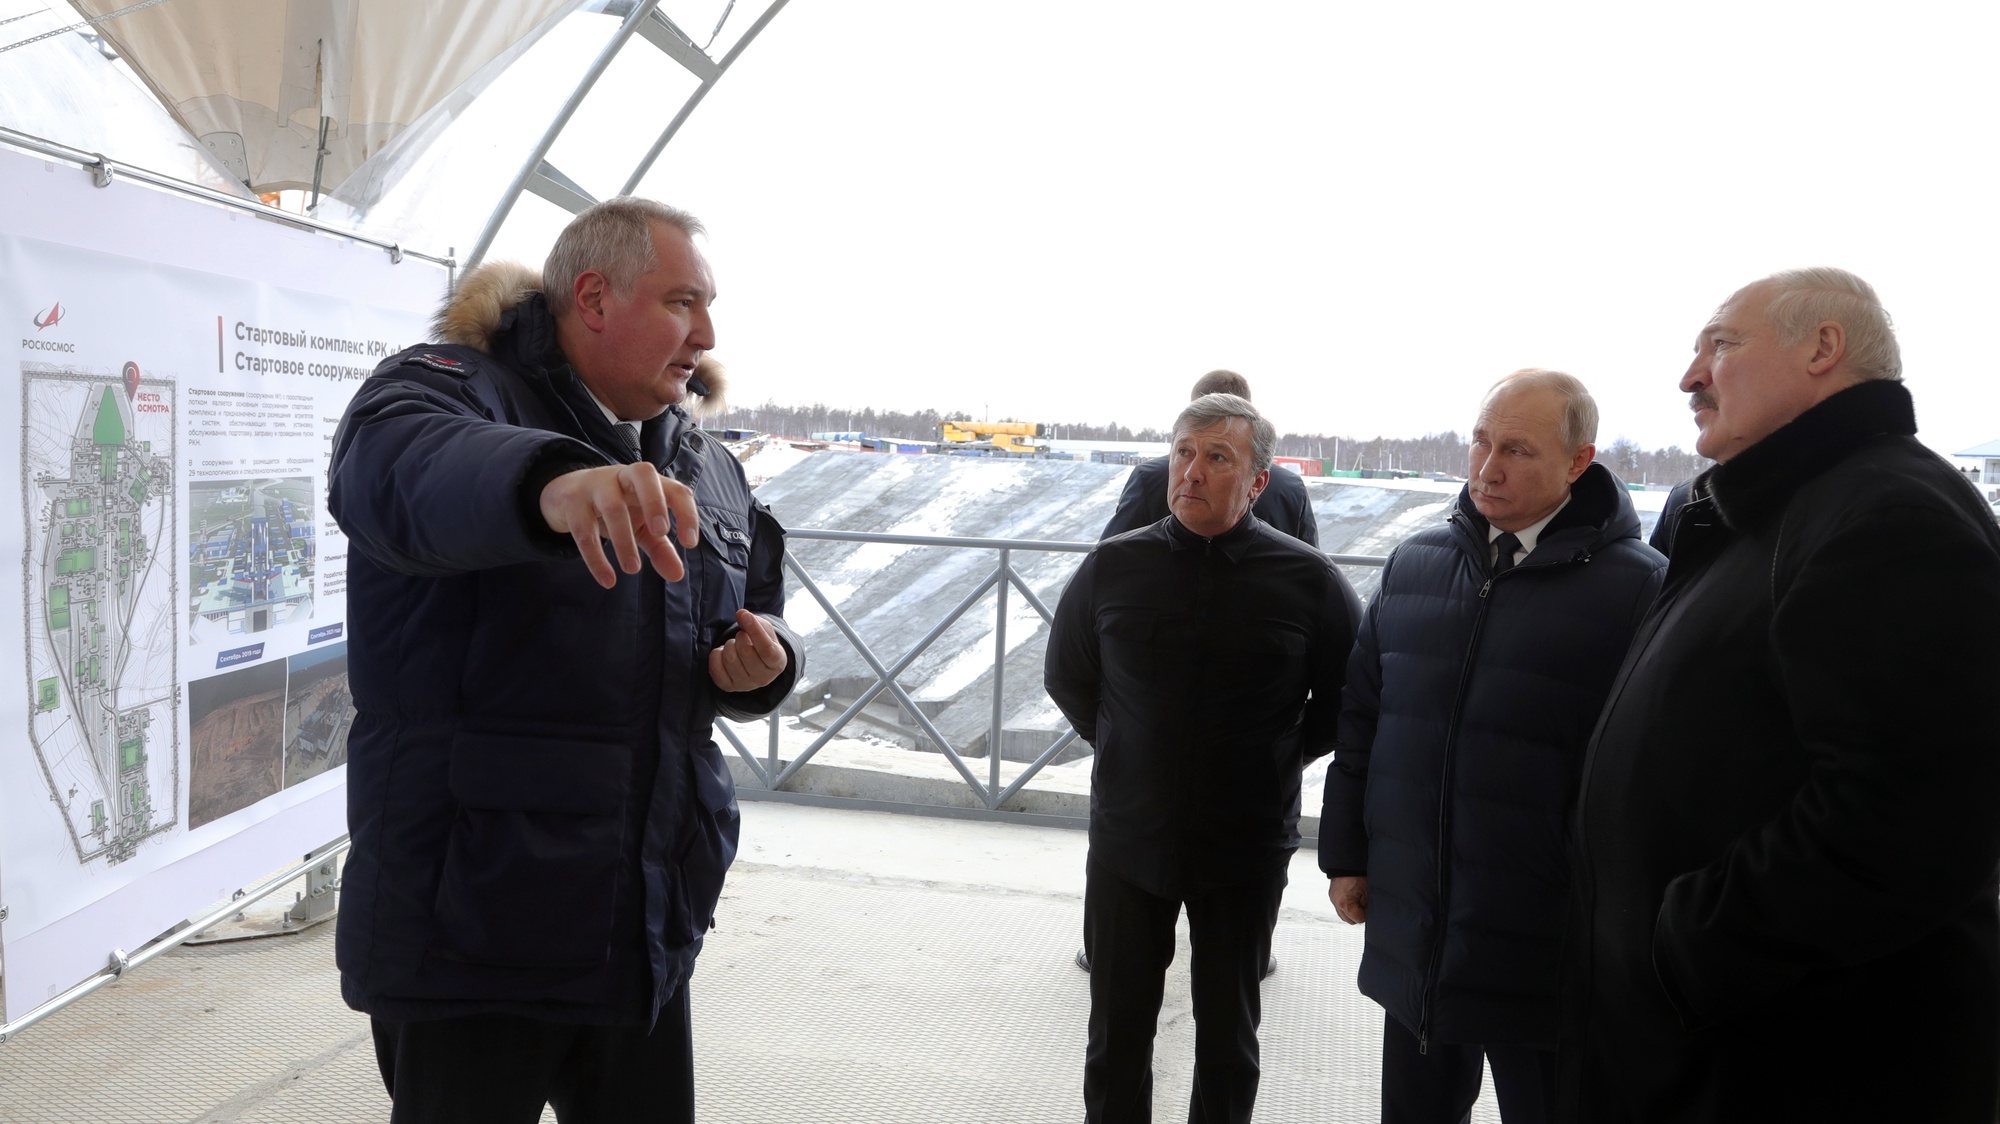 epa09885669 Russian President Vladimir Putin (2-R), Belarusian President Alexander Lukashenko (R) and Roscosmos State Space Corporation Director General Dmitry Rogozin (L) visit a construction site of the Angara space rocket complex at the Vostochny cosmodrome outside the city of Tsiolkovsky, some 180 km north of Blagoveschensk, in the far eastern Amur region, Russia, 12 April 2022. Belarusian President is on a working visit to Russia.  EPA/MIKHAIL KLIMENTYEV / KREMLIN POOL / SPUTNIK MANDATORY CREDIT